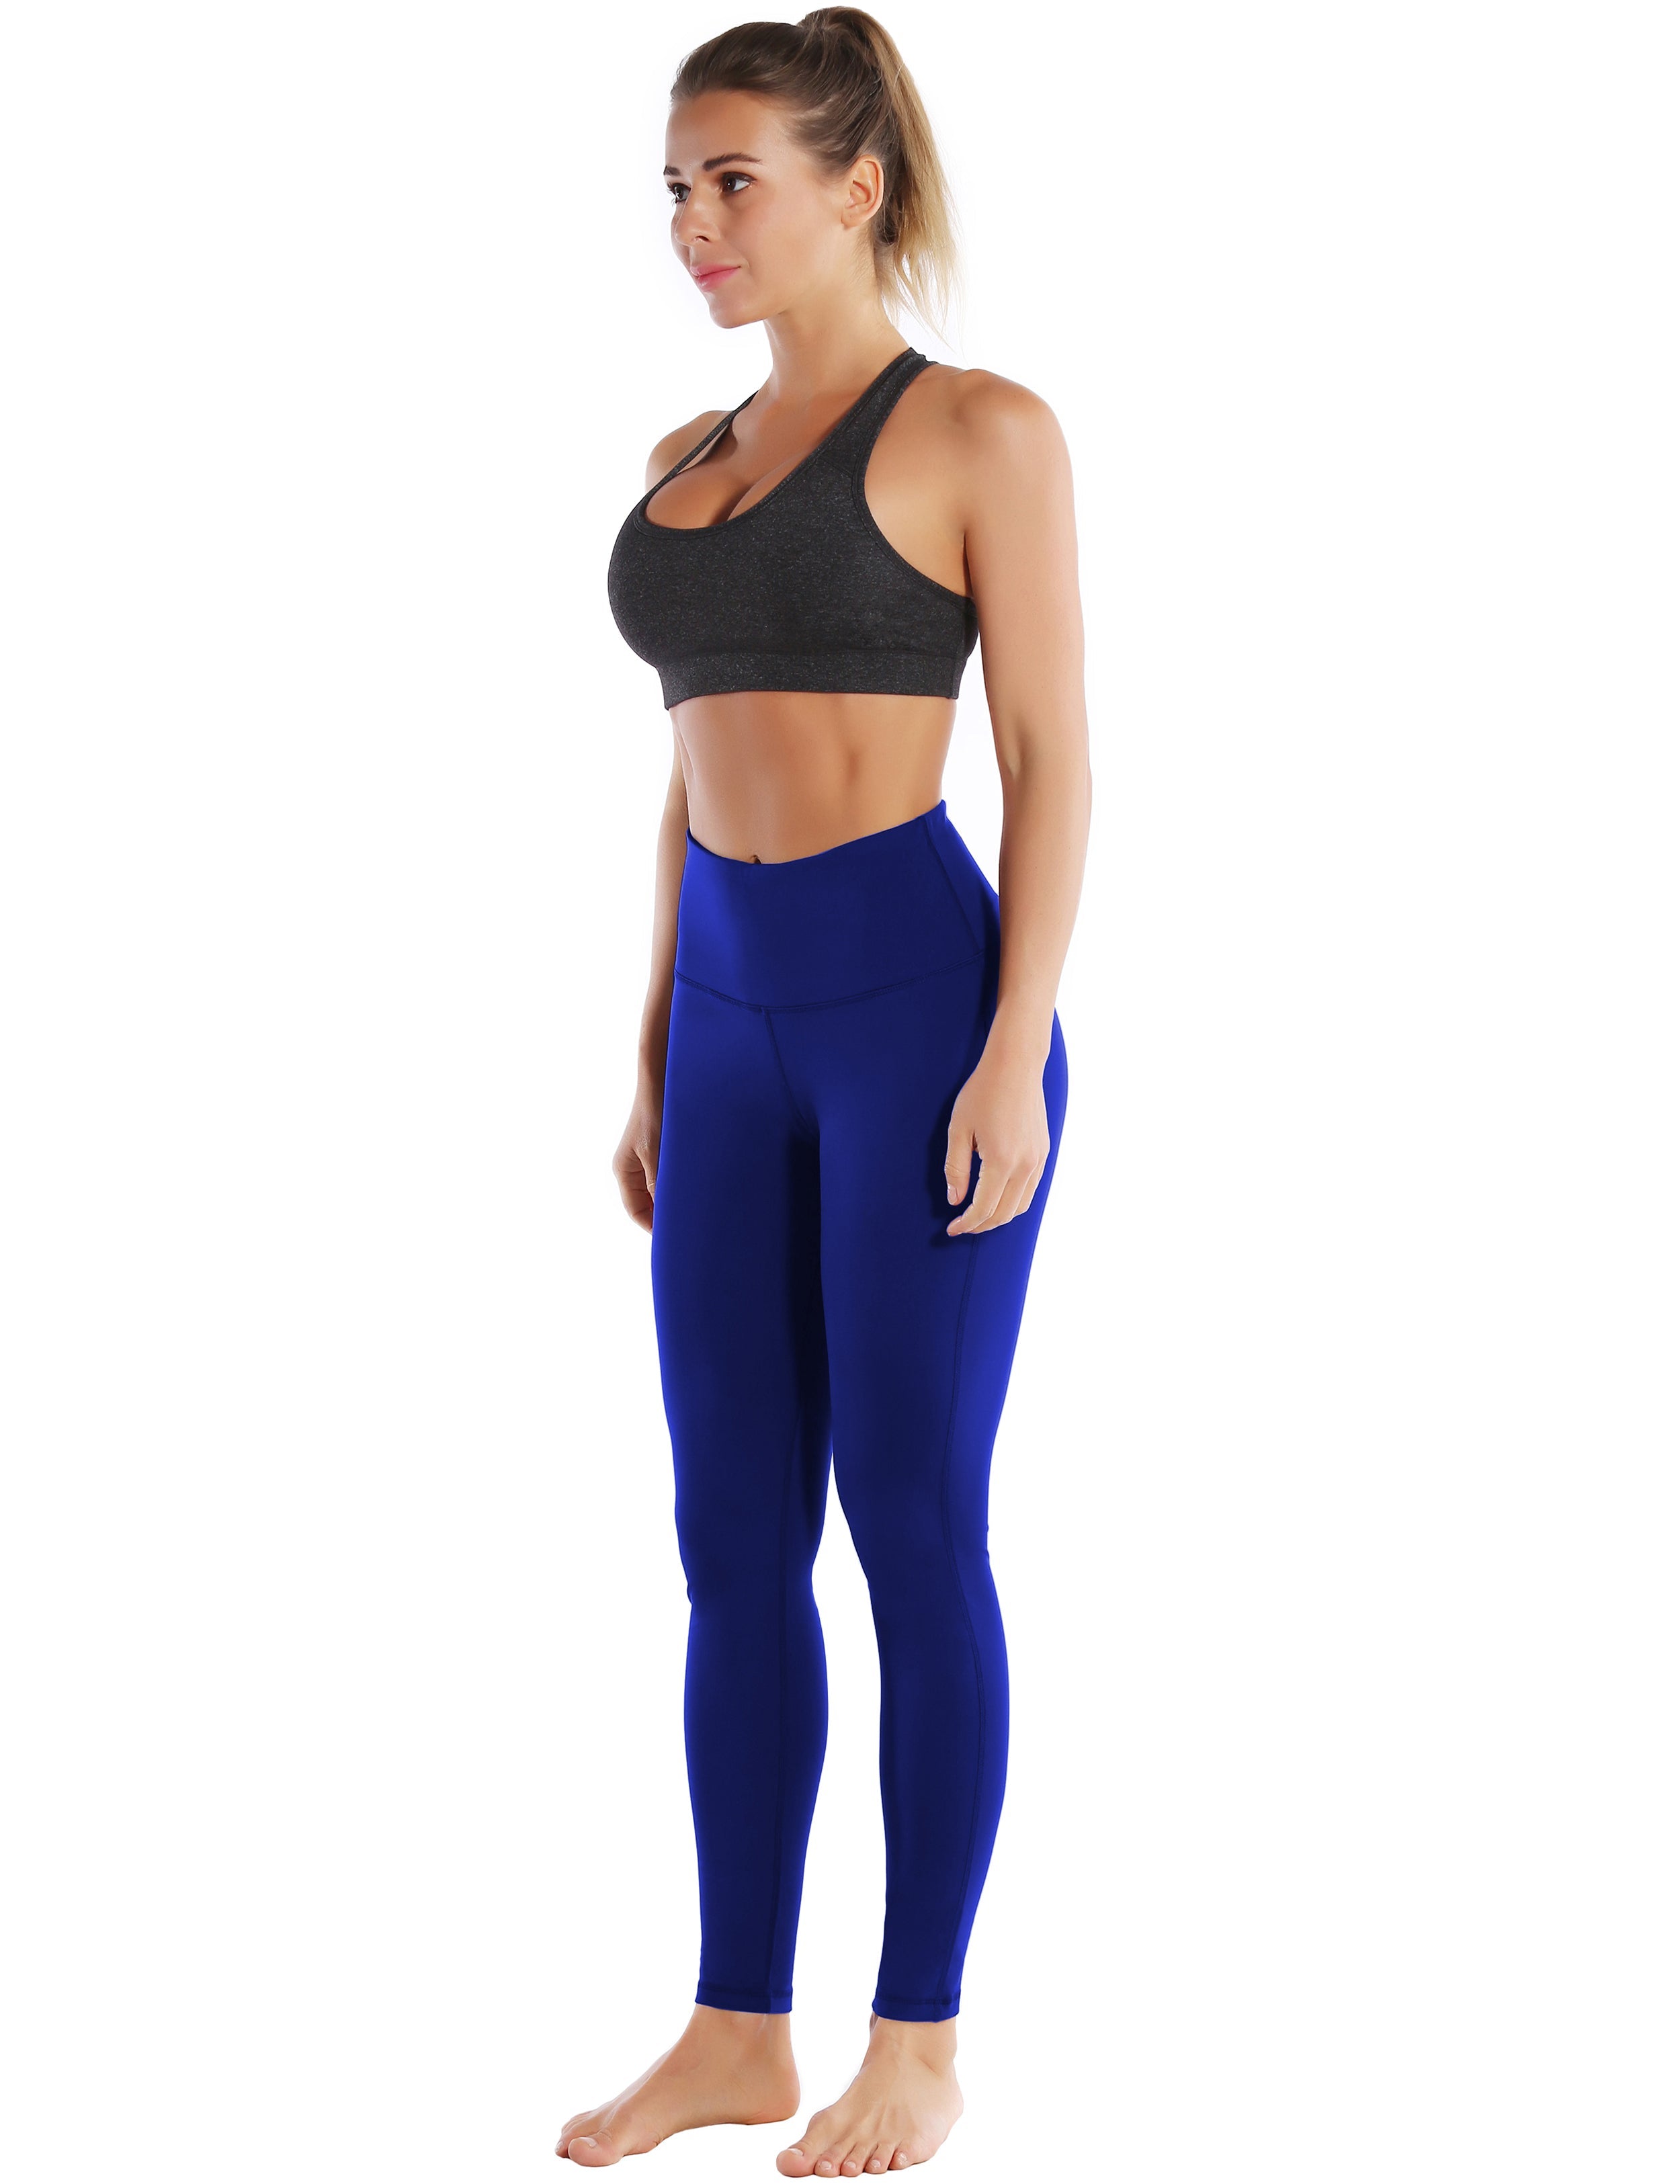 High Waist Side Line Biking Pants navy Side Line is Make Your Legs Look Longer and Thinner 75%Nylon/25%Spandex Fabric doesn't attract lint easily 4-way stretch No see-through Moisture-wicking Tummy control Inner pocket Two lengths